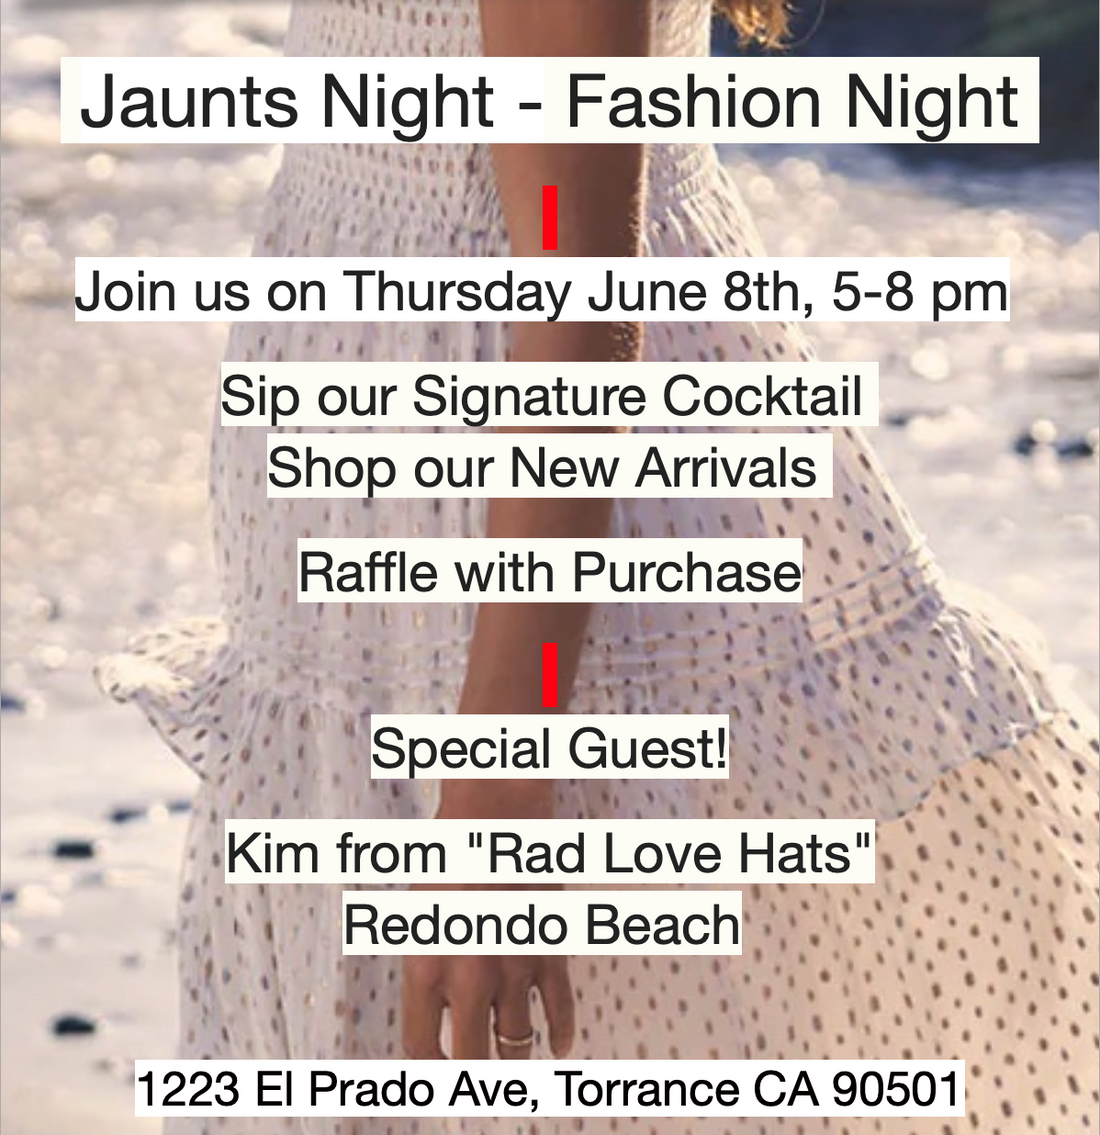 Join us for our Jaunts Night - Fashion Night on Thursday June 8th, 5-8pm